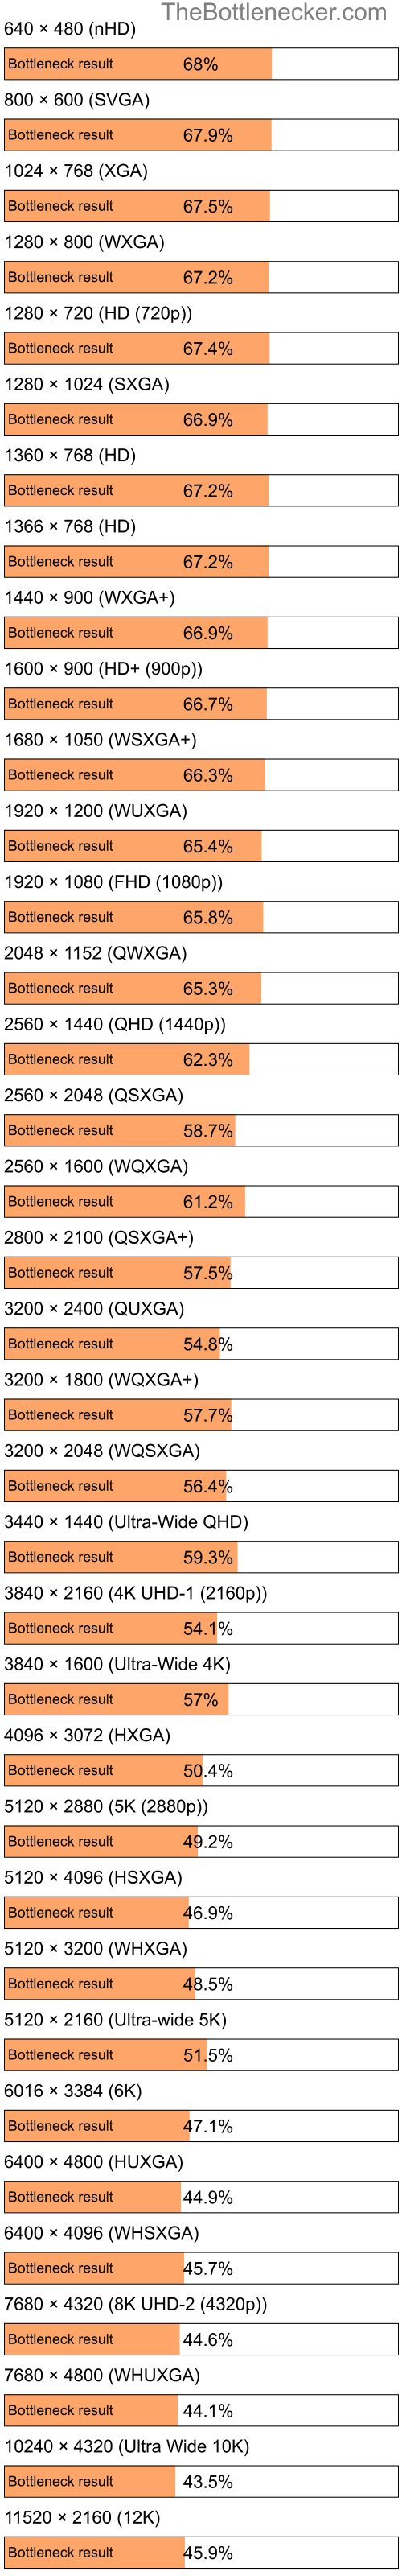 Bottleneck results by resolution for AMD A8-6600K and NVIDIA GeForce RTX 3070 in General Tasks